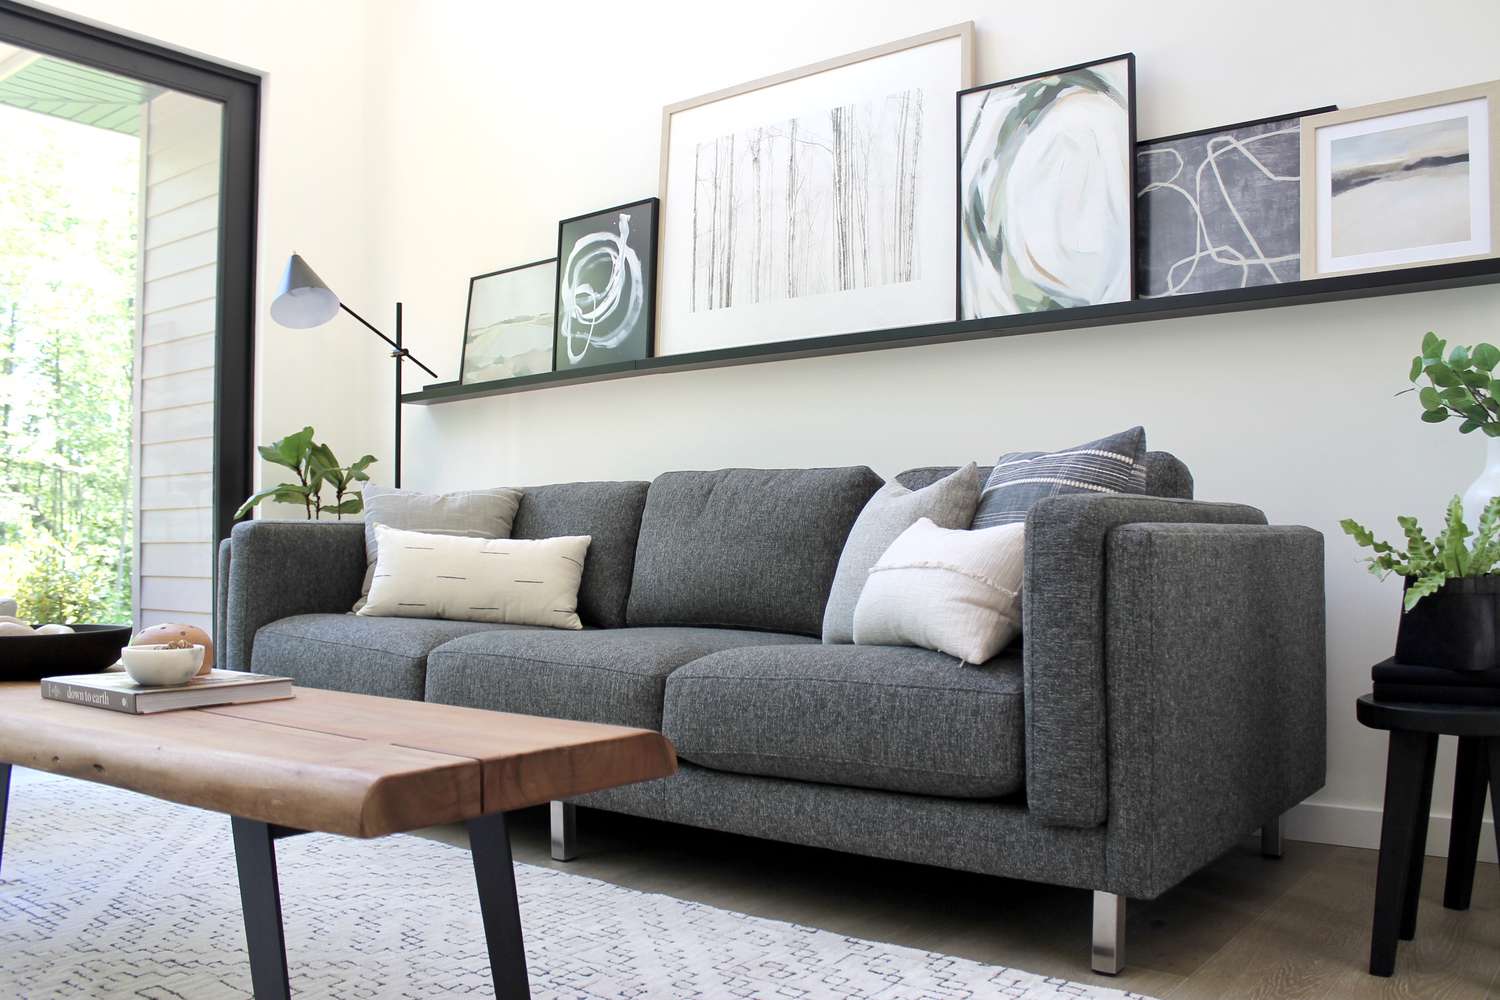 Choosing the Perfect Sofa for Your Living Room: Tips and Tricks